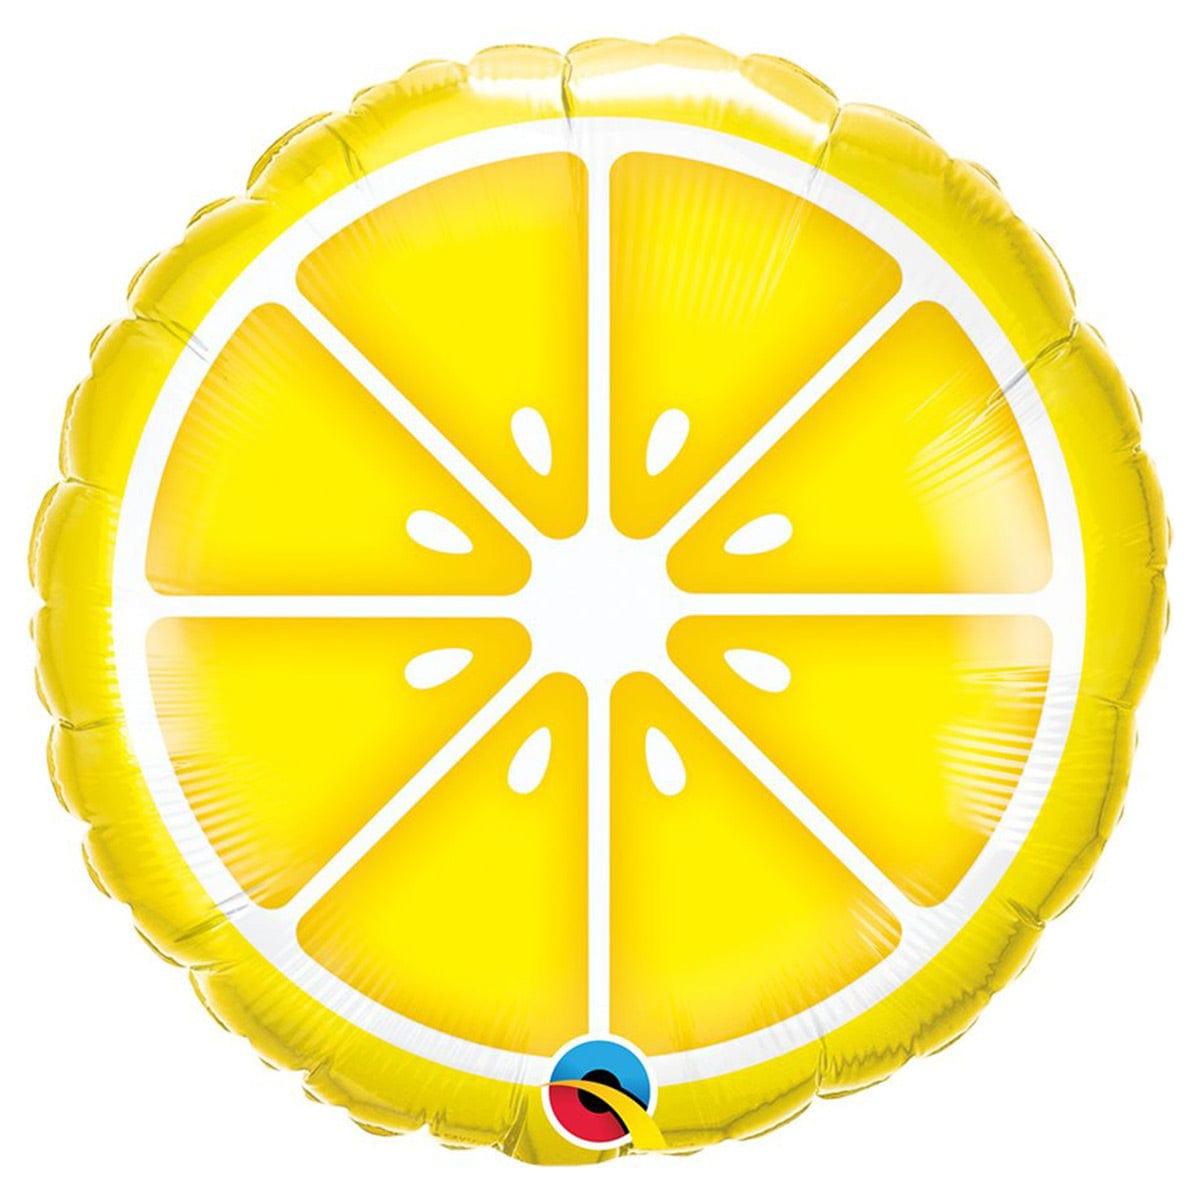 LE GROUPE BLC INTL INC Balloons Citrus Foil Balloon, 18 in, Yellow